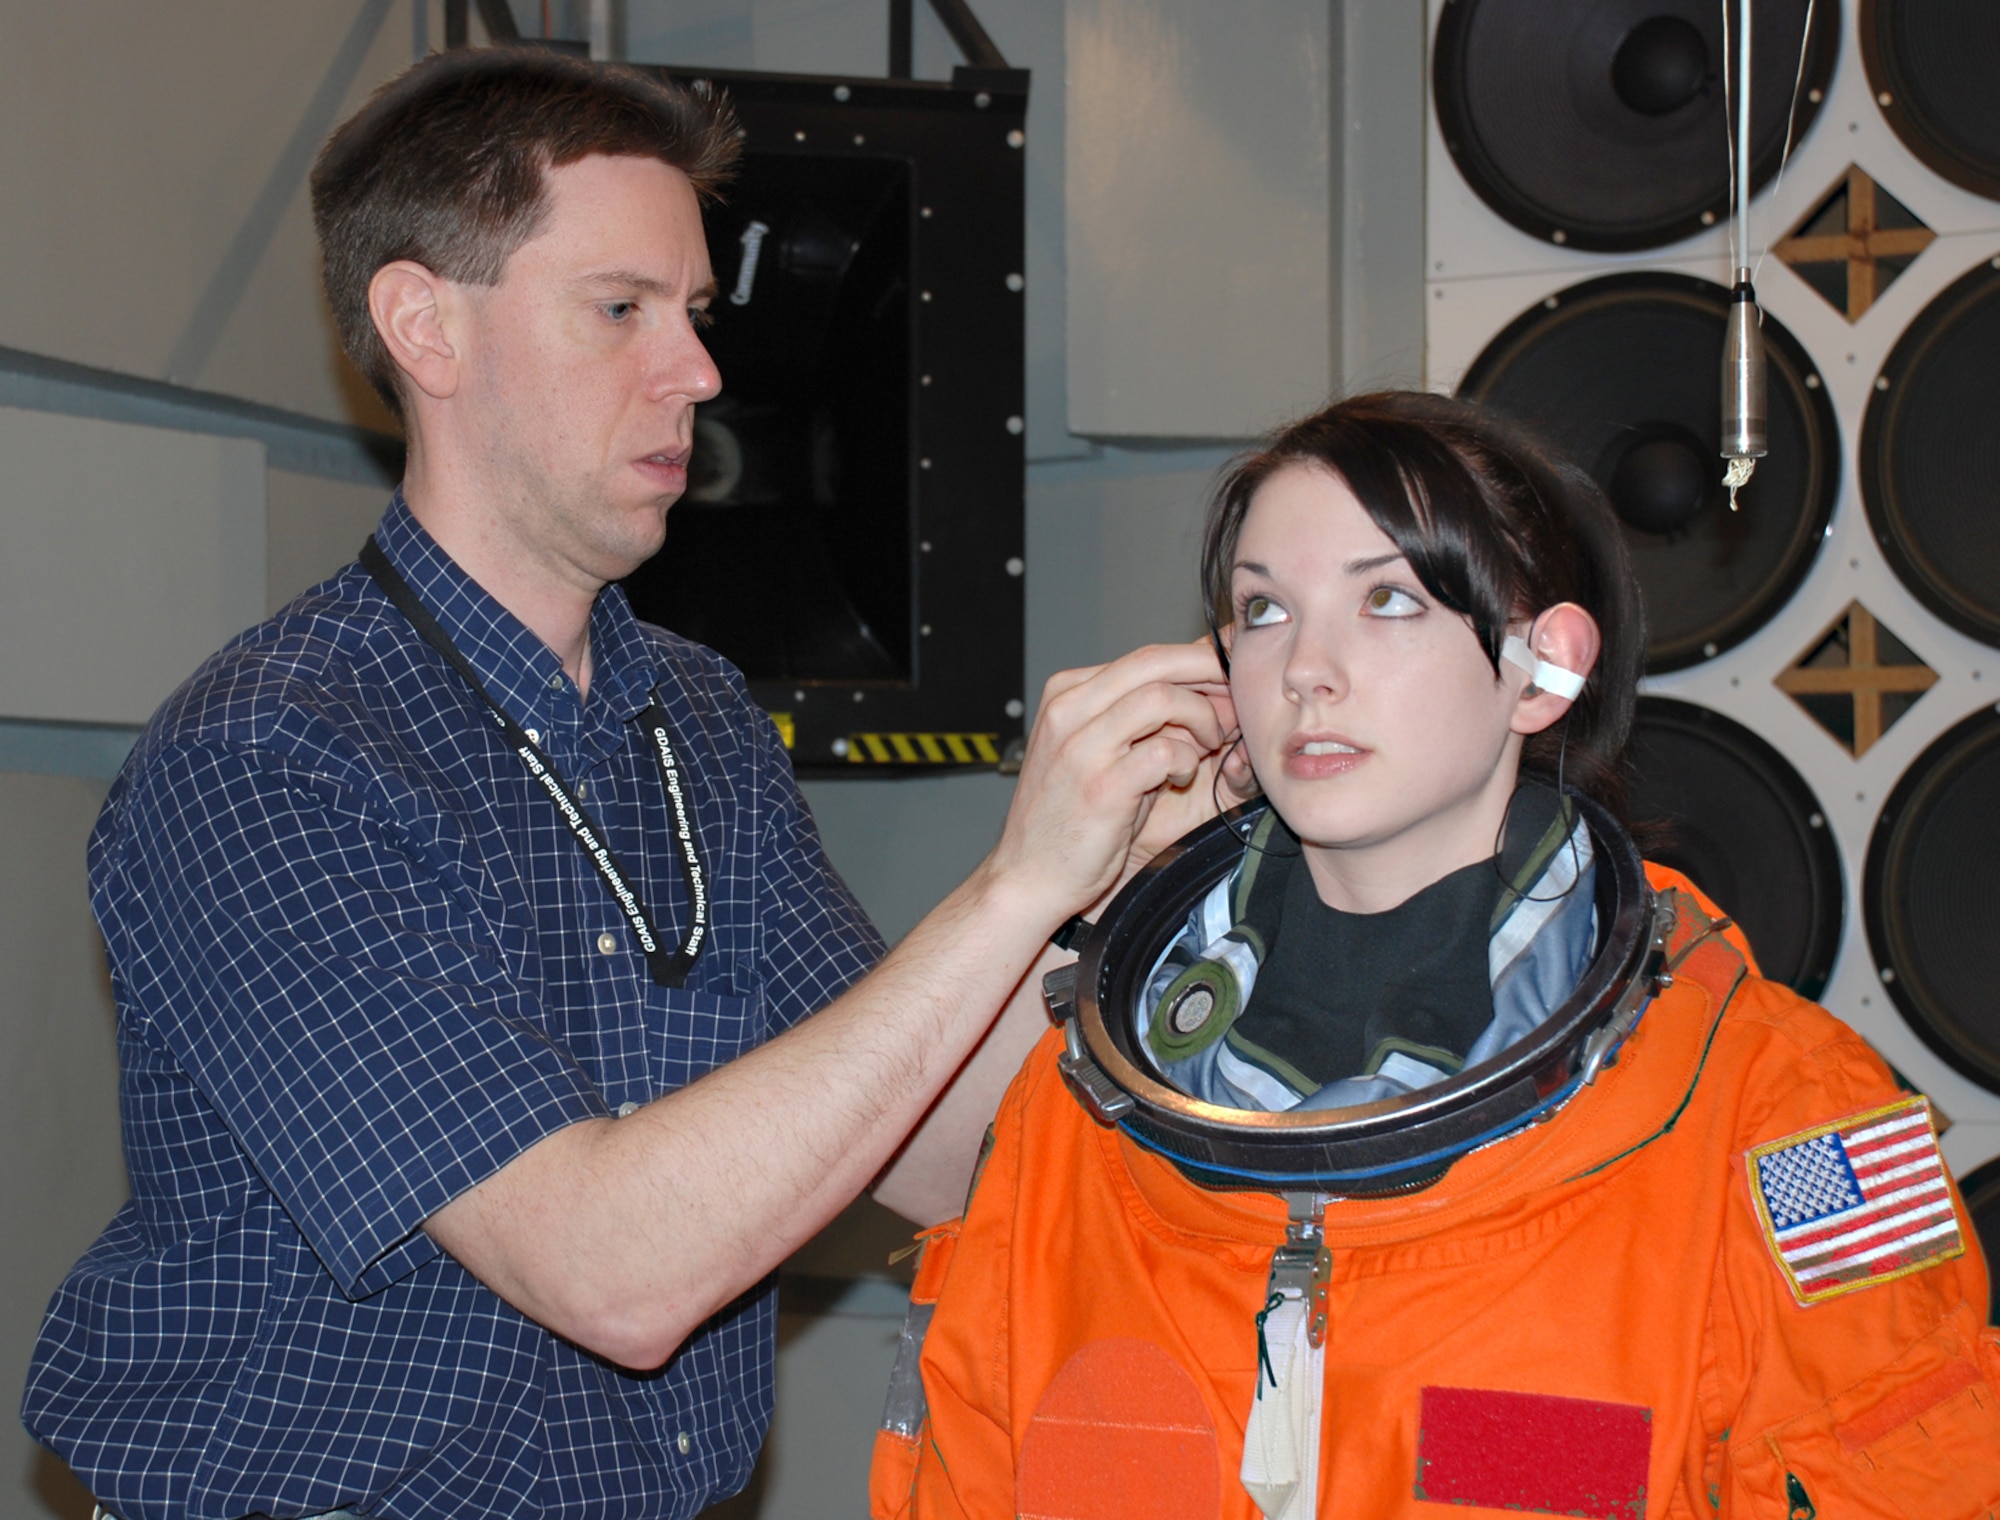 Technician Paul Schley of General Dynamics Advanced Information Systems (GDAIS) installs miniature microphones in the ears of test subject Beth Greschner, also of GDAIS. The microphones record sound equivalent to what an astronaut would hear at liftoff of the space shuttle. (Photo by Chris Gulliford, AFRL/HE)